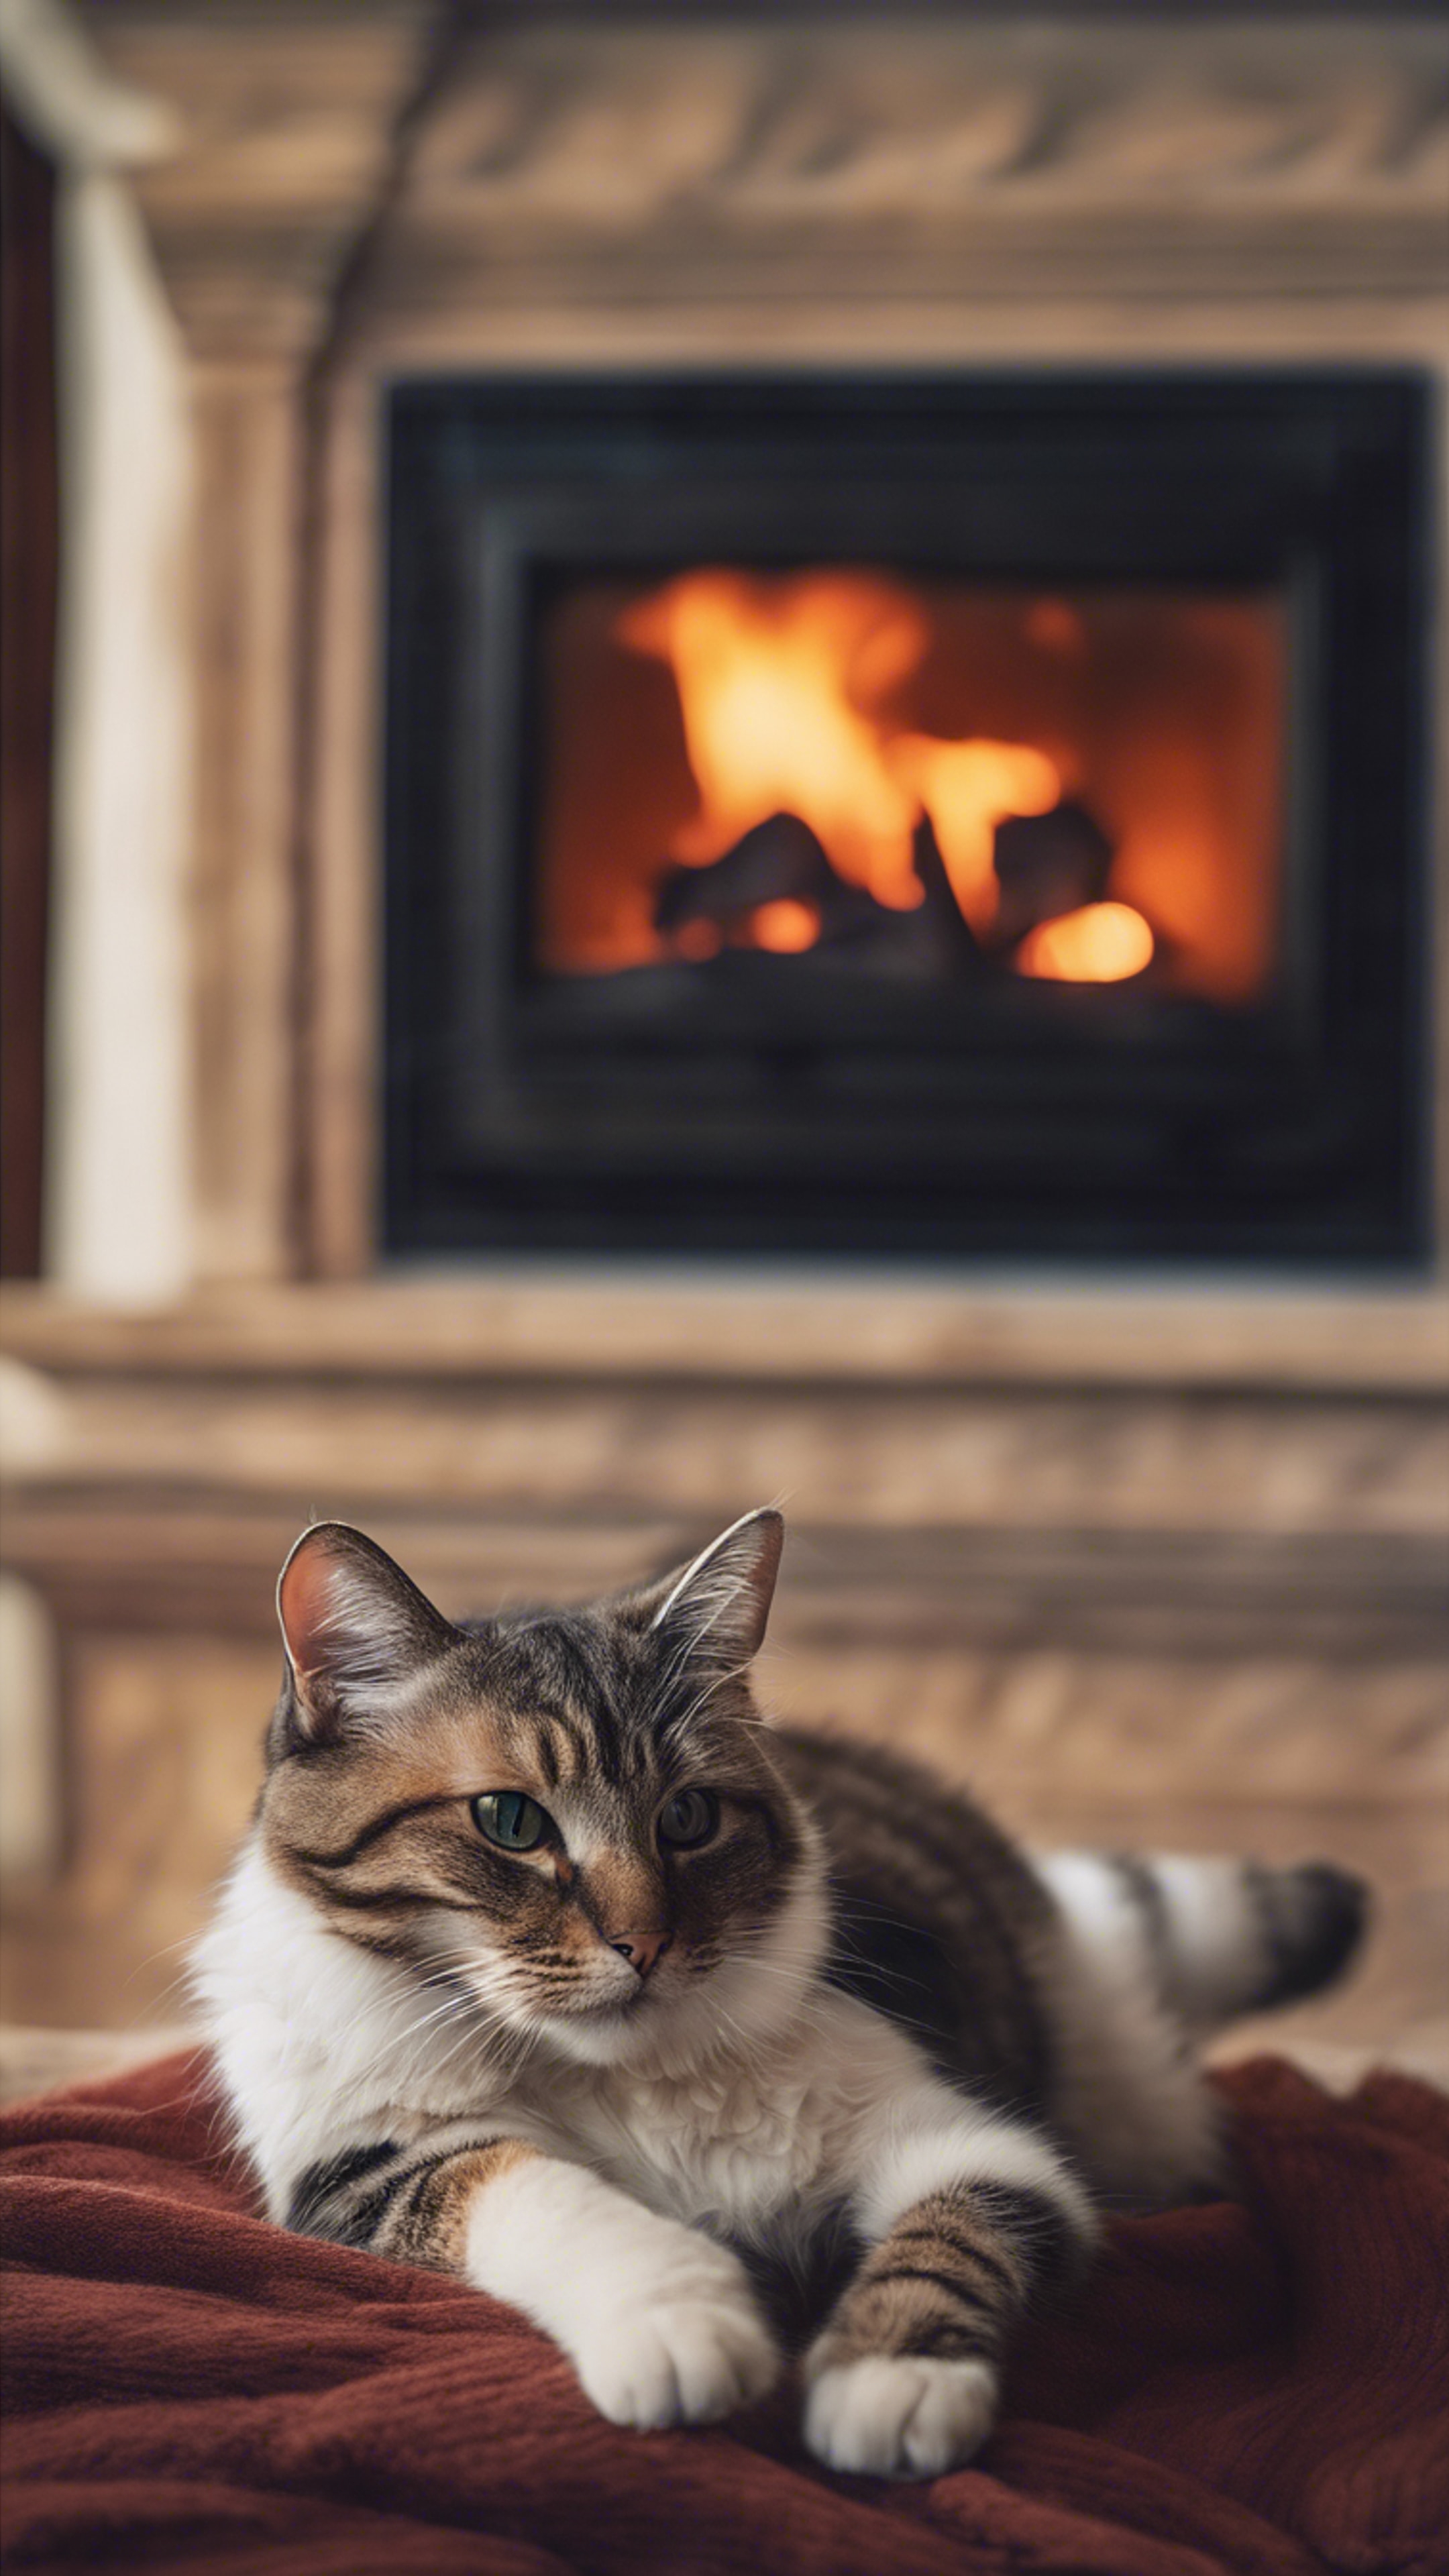 A cat lounging in front of a roaring fireplace, completely mesmerized by the flickering flames. Tapet[f30d5ca7e04c497dade0]